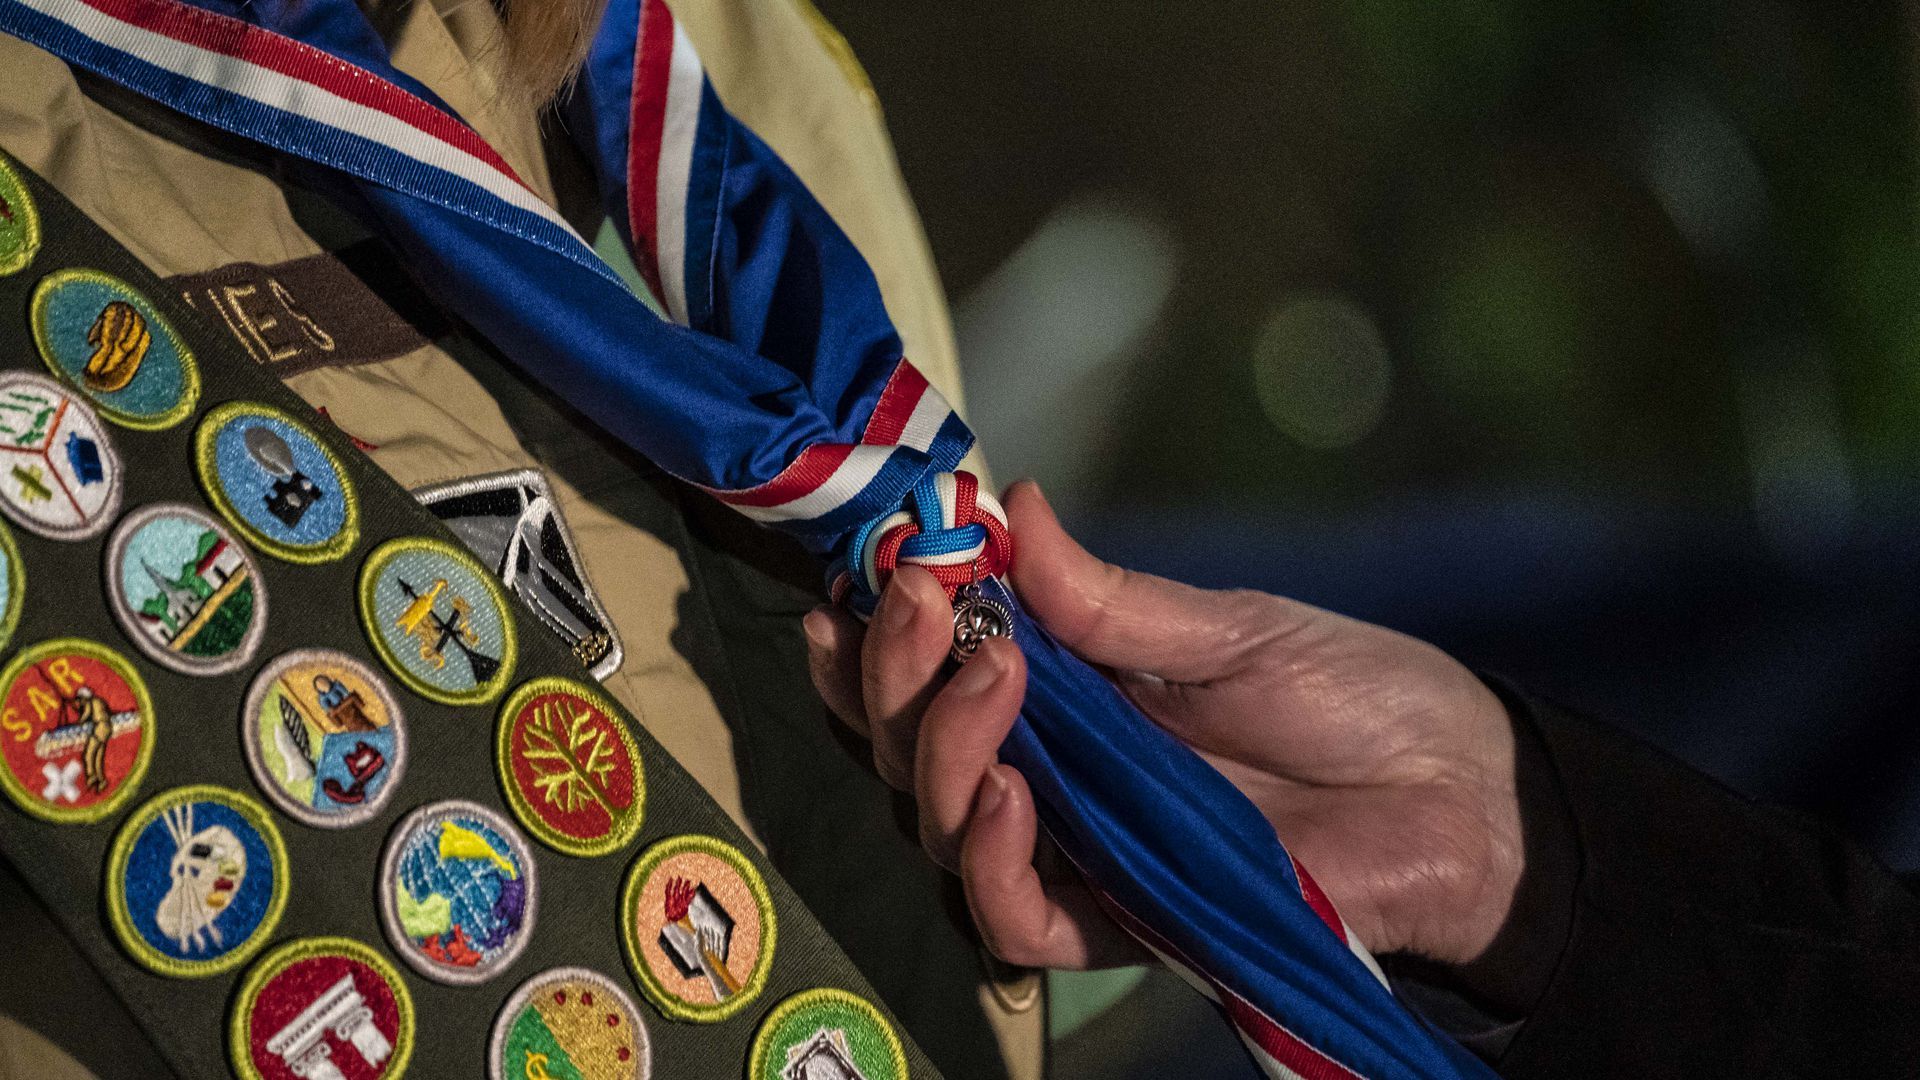 A scout receives a blue Eagle Scout neckerchief during a ceremony. Photo: David Ryder/Getty Images